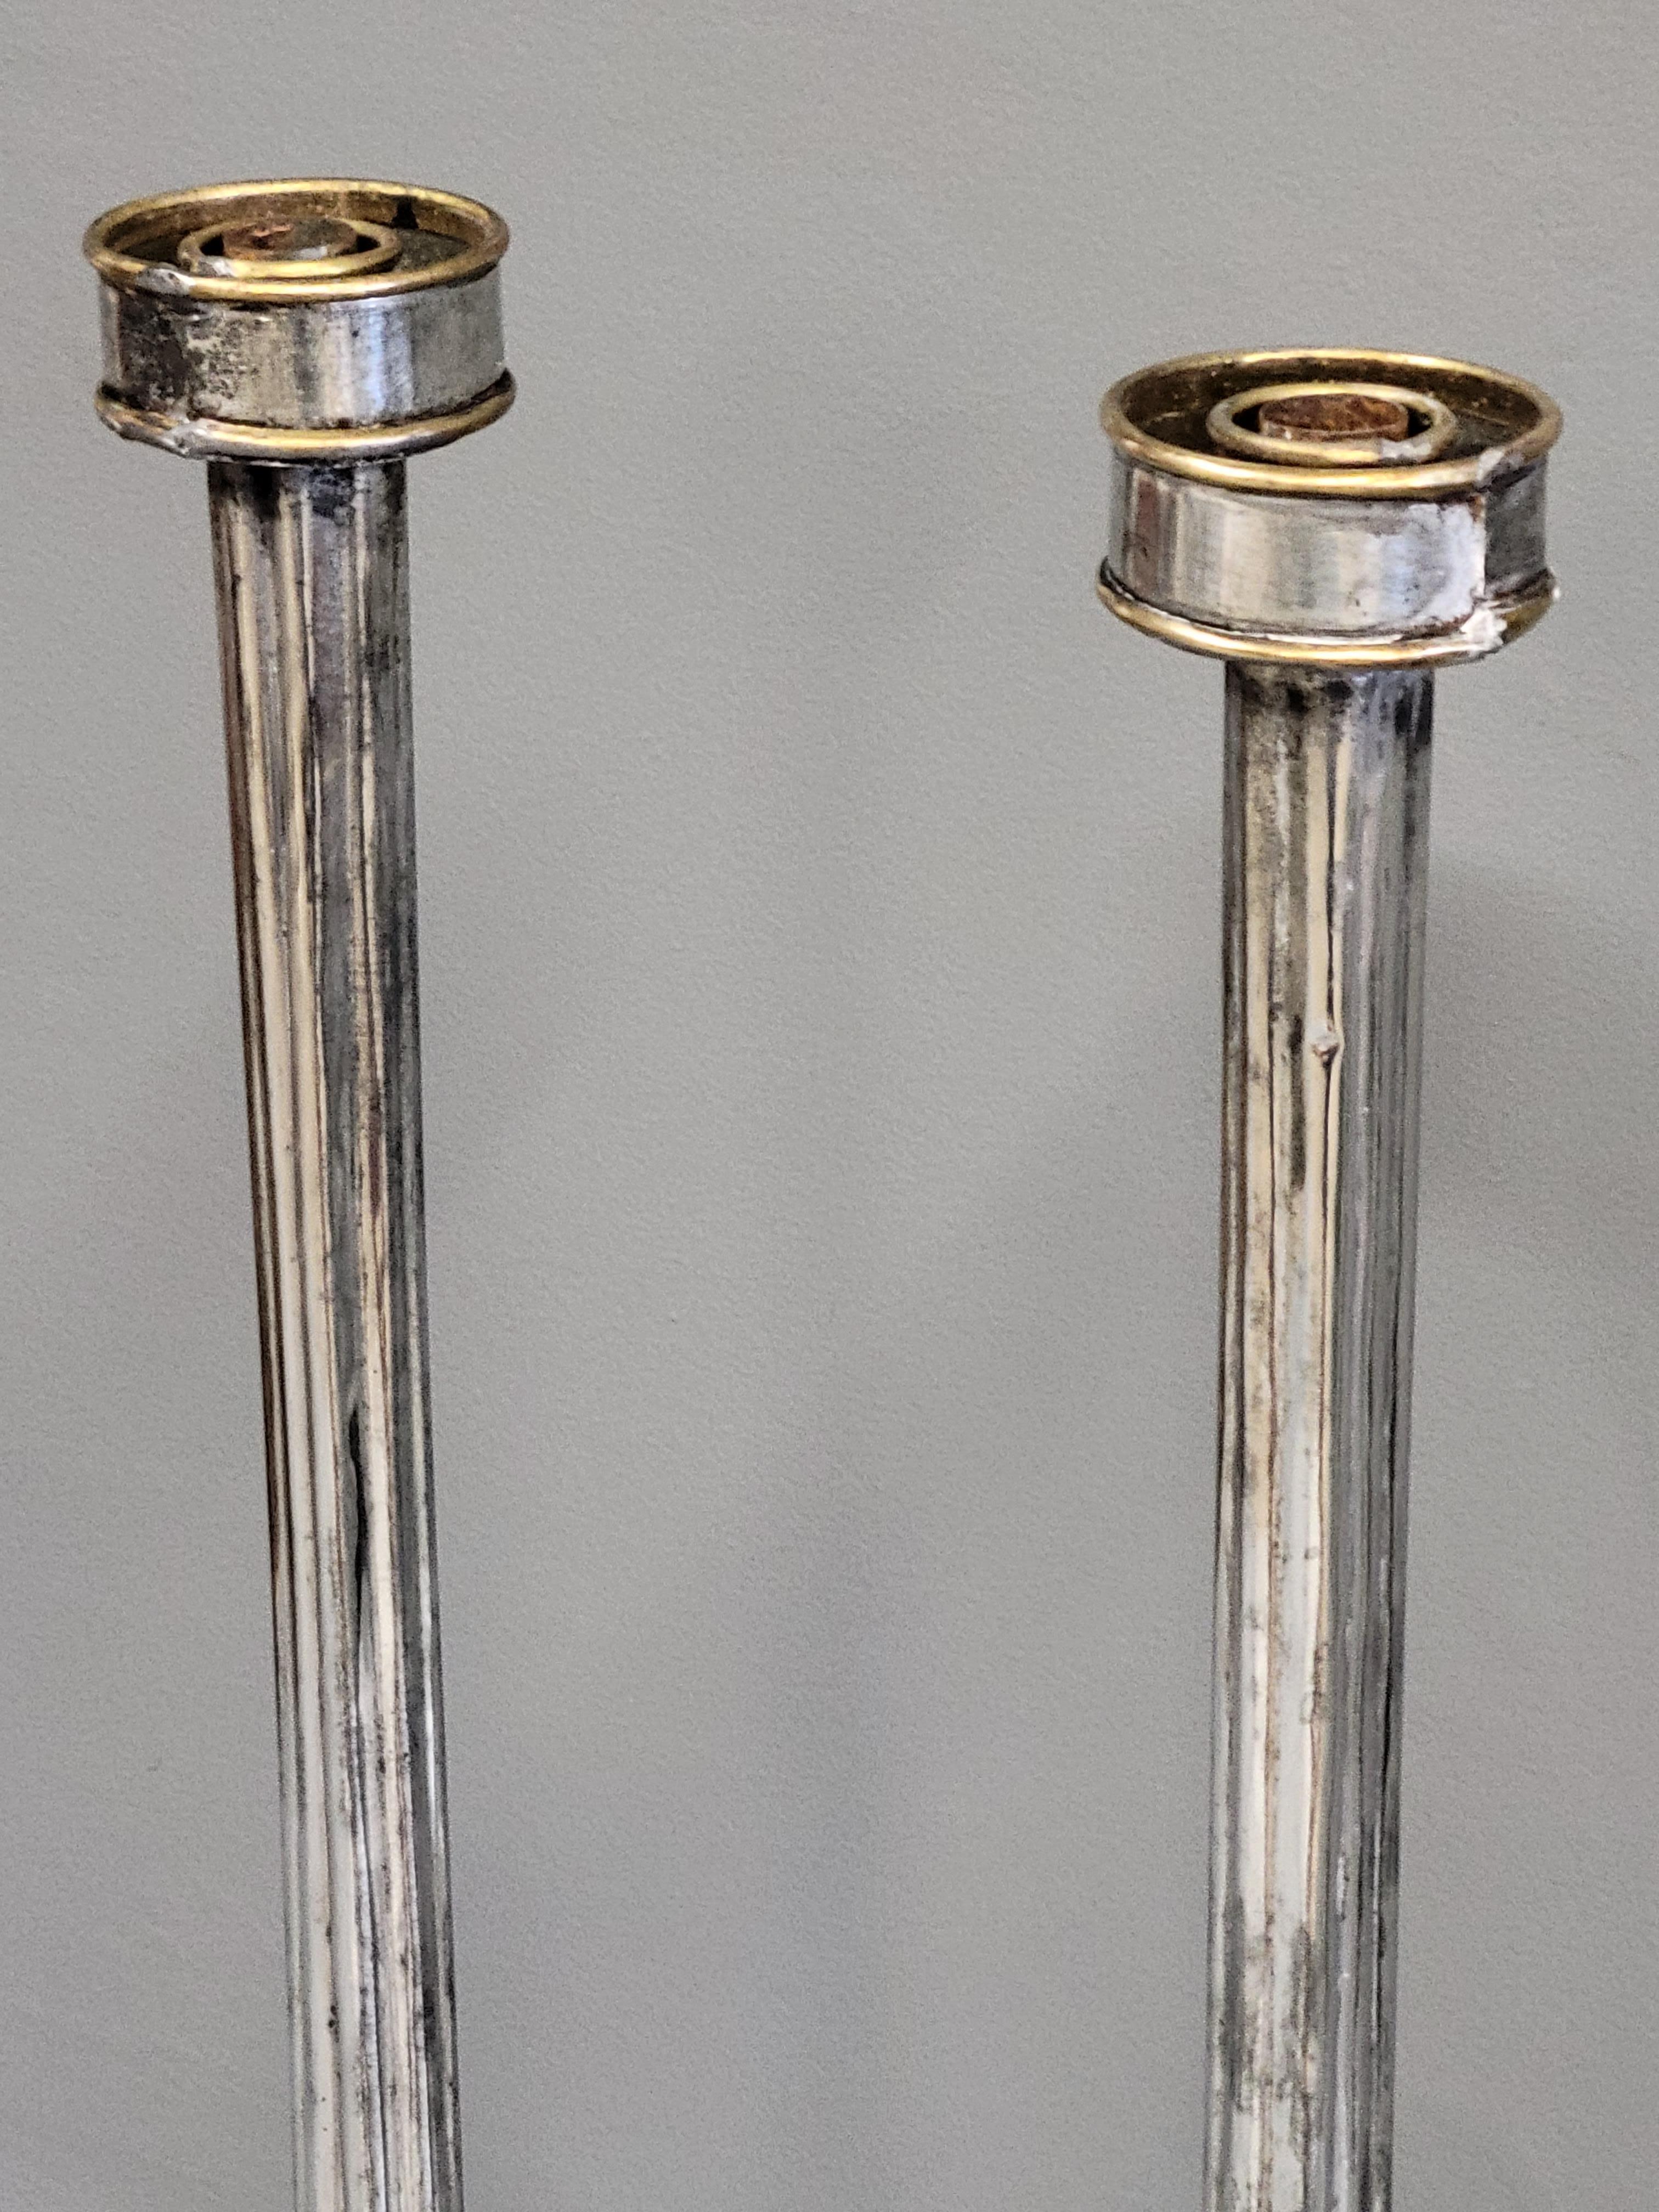 Hand-Crafted Vintage Mid-Century Gene Byron Tin and Brass Candlesticks - a Pair